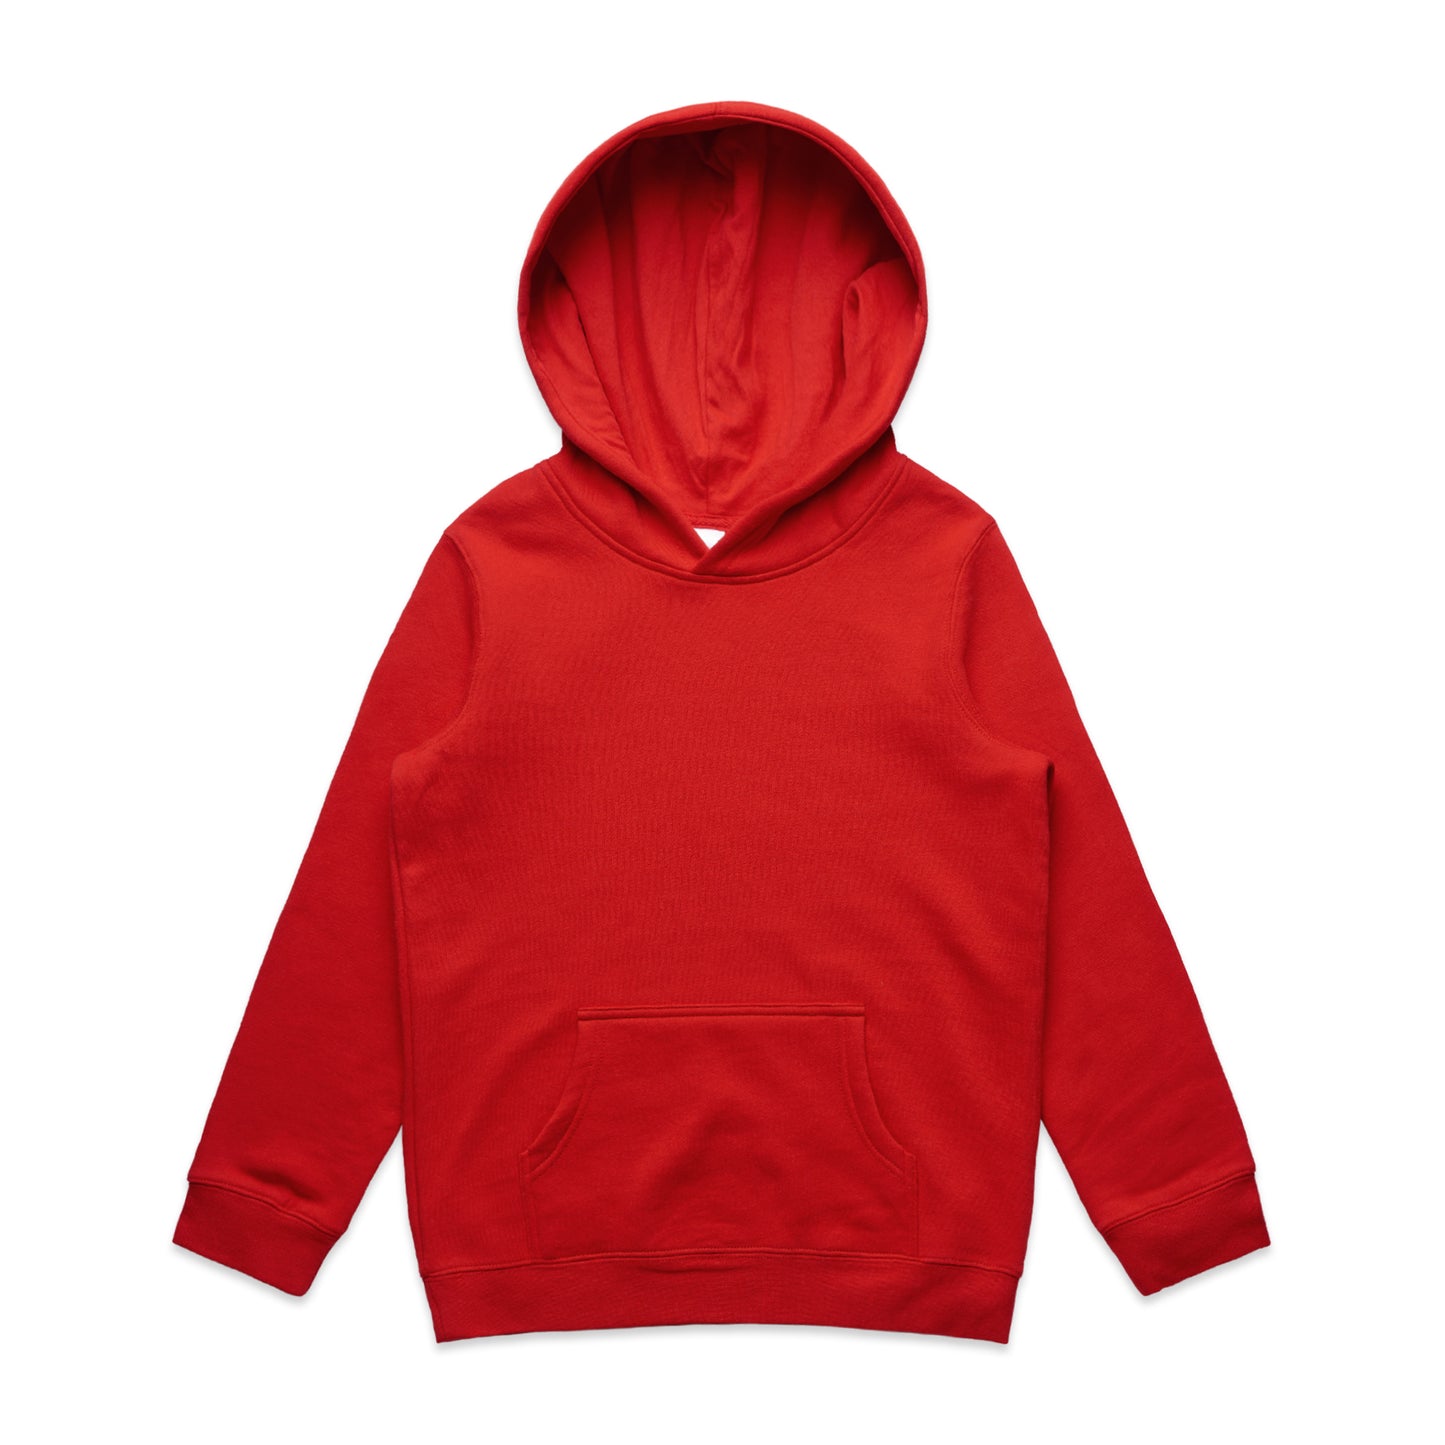 YOUTHS SUPPLY HOOD